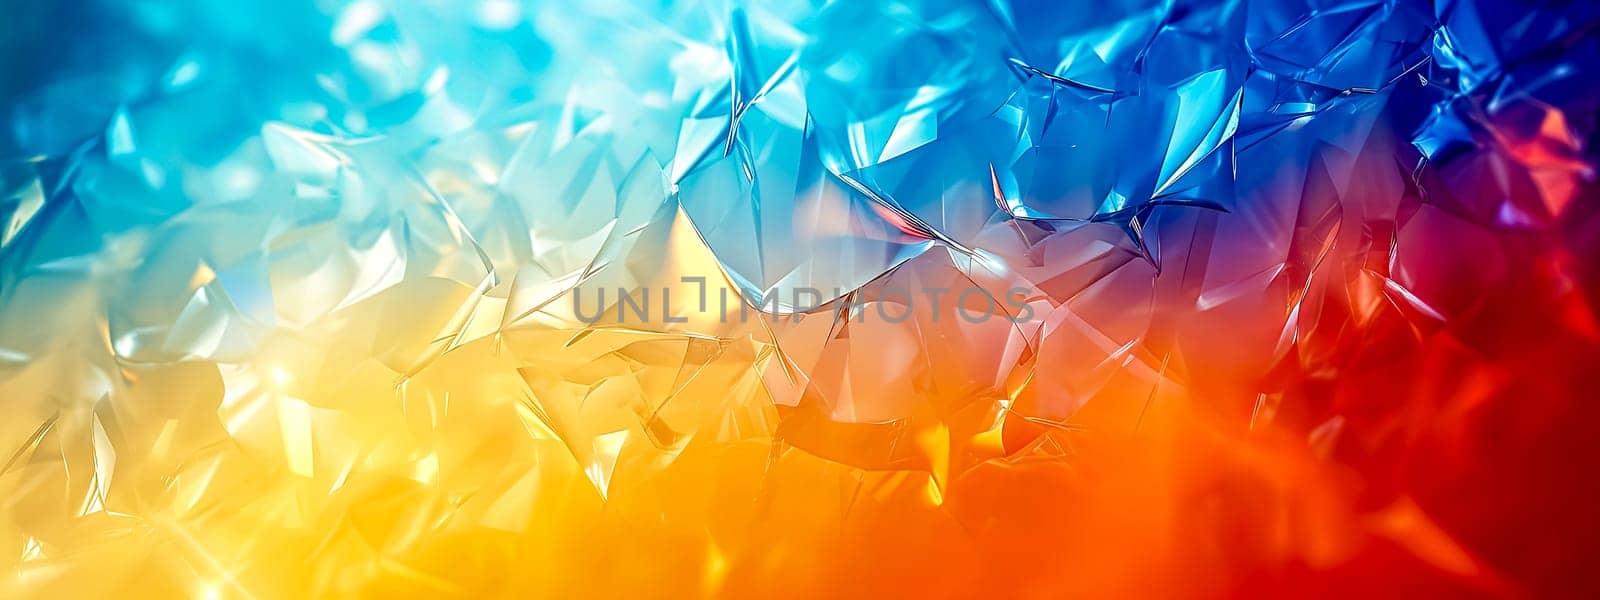 Abstract and dynamic composition with a flow of crystalline shapes transitioning from warm golden tones to cool blues and vibrant reds, suggestive of a digital art concept. by Edophoto